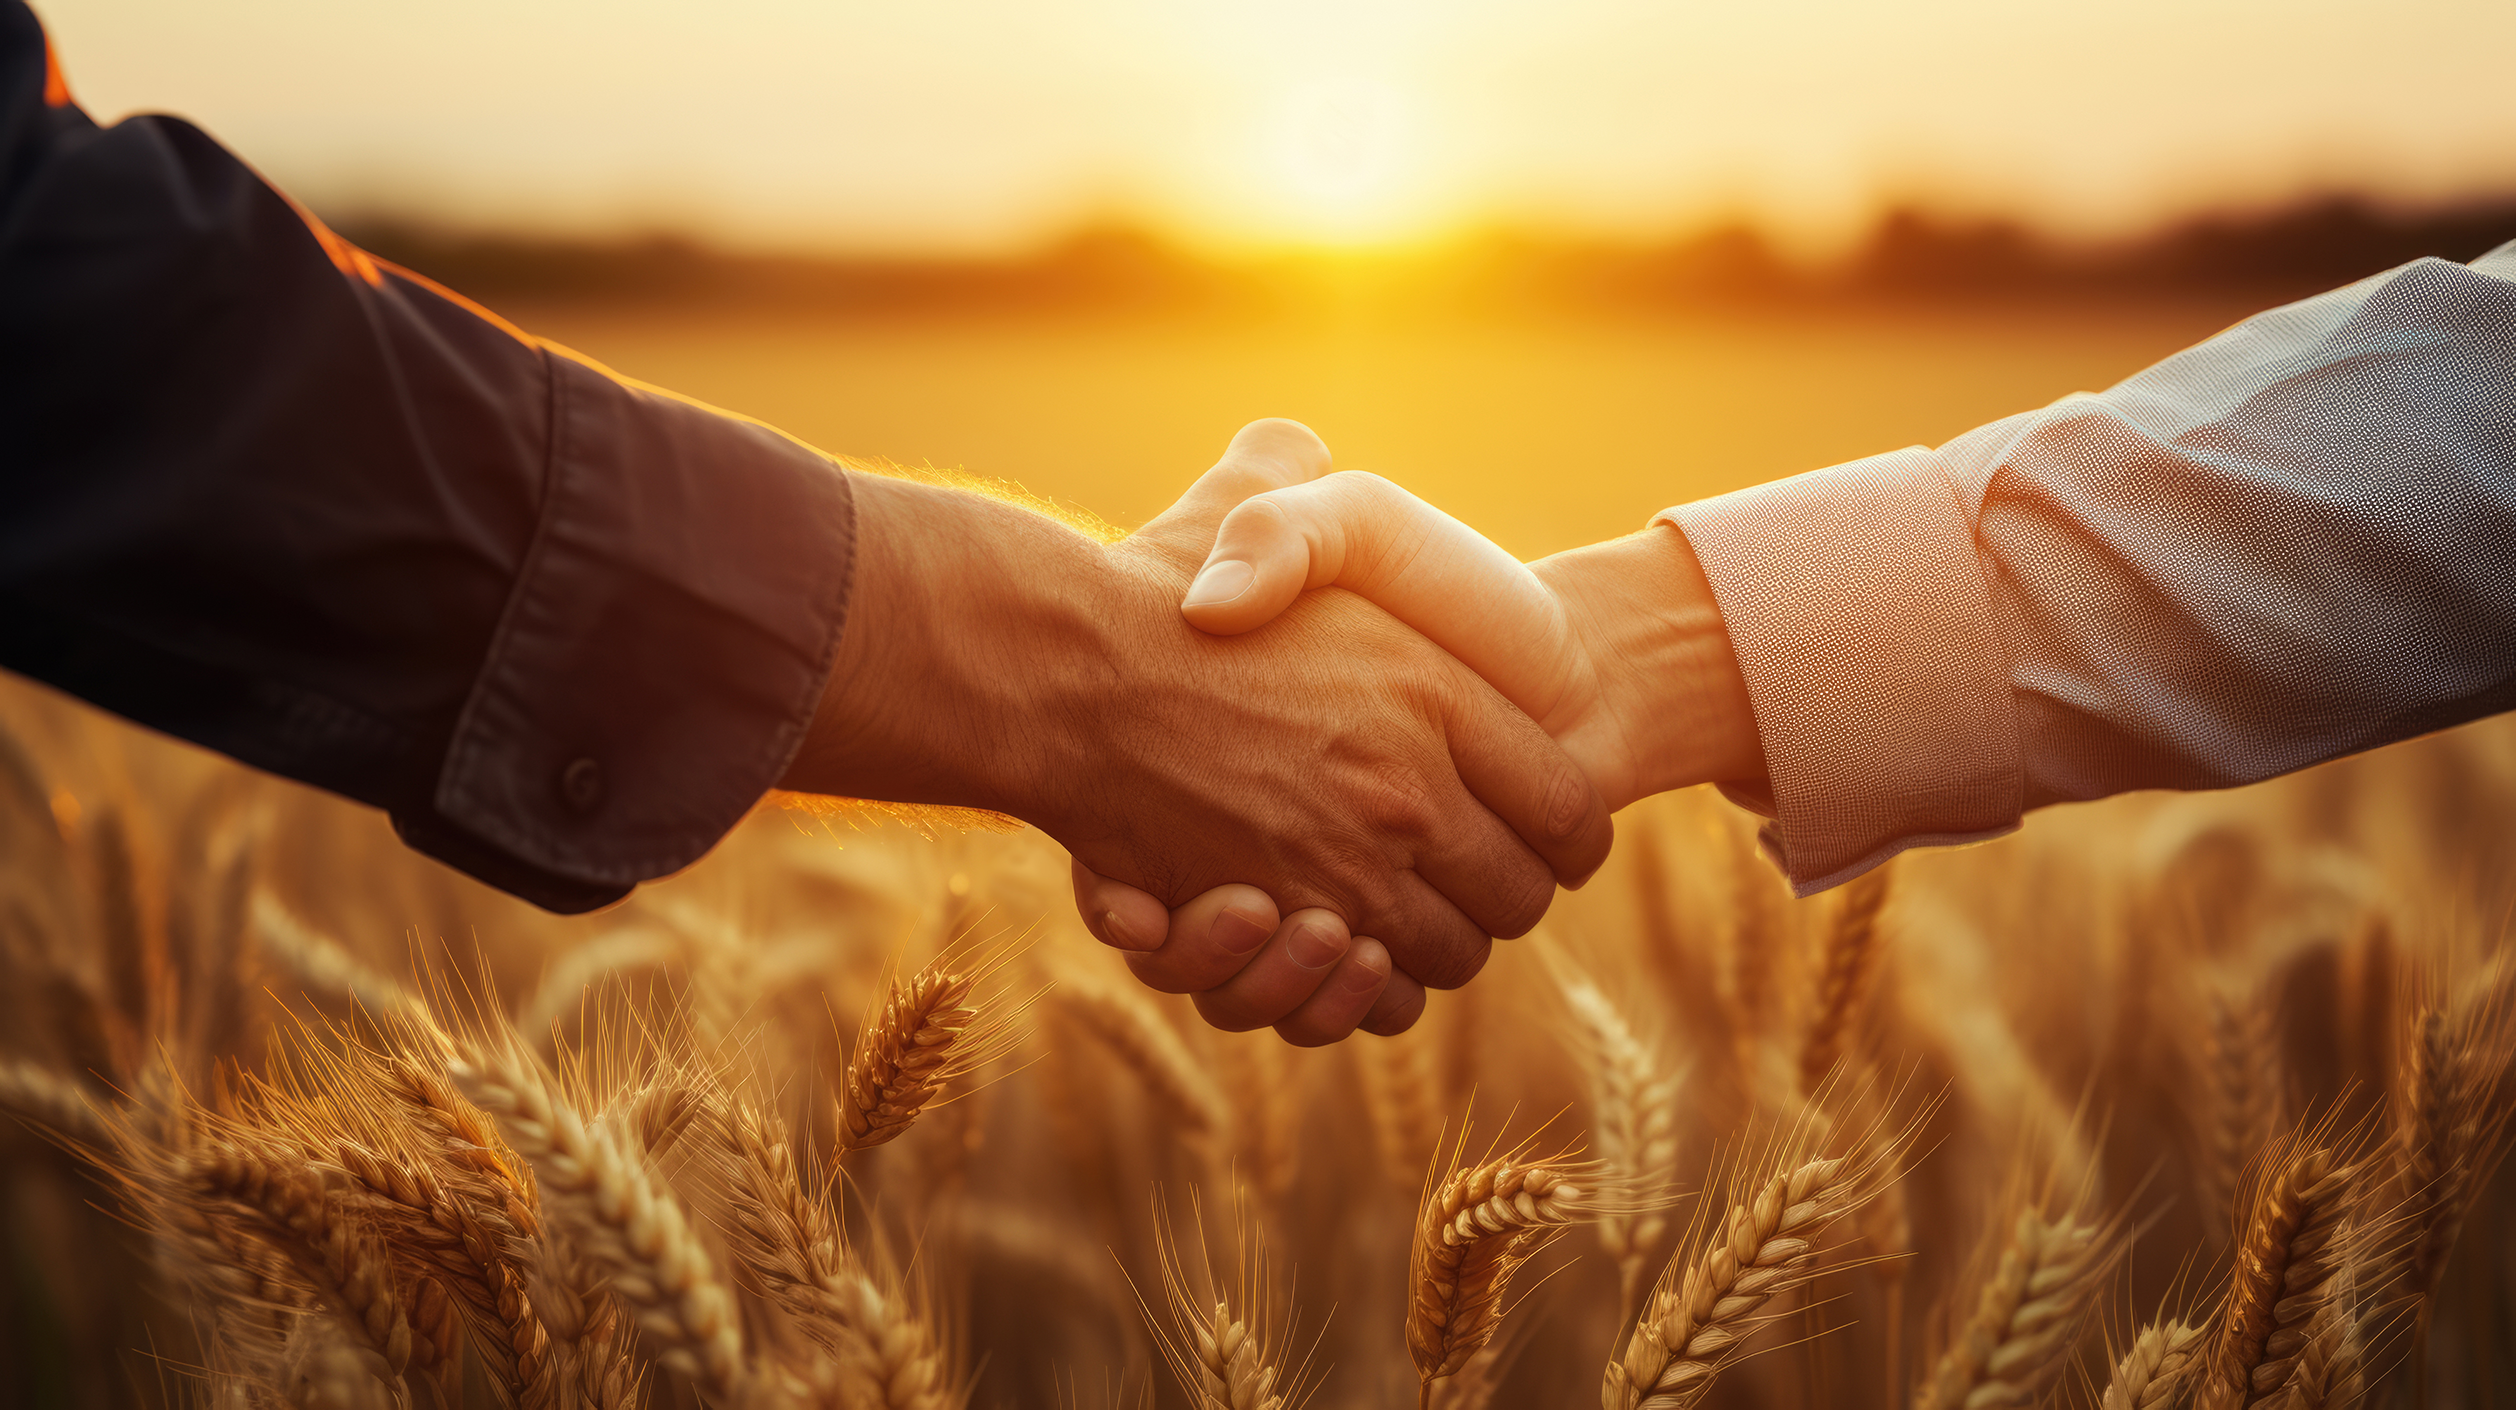 Handshake in a cereal field during sunset